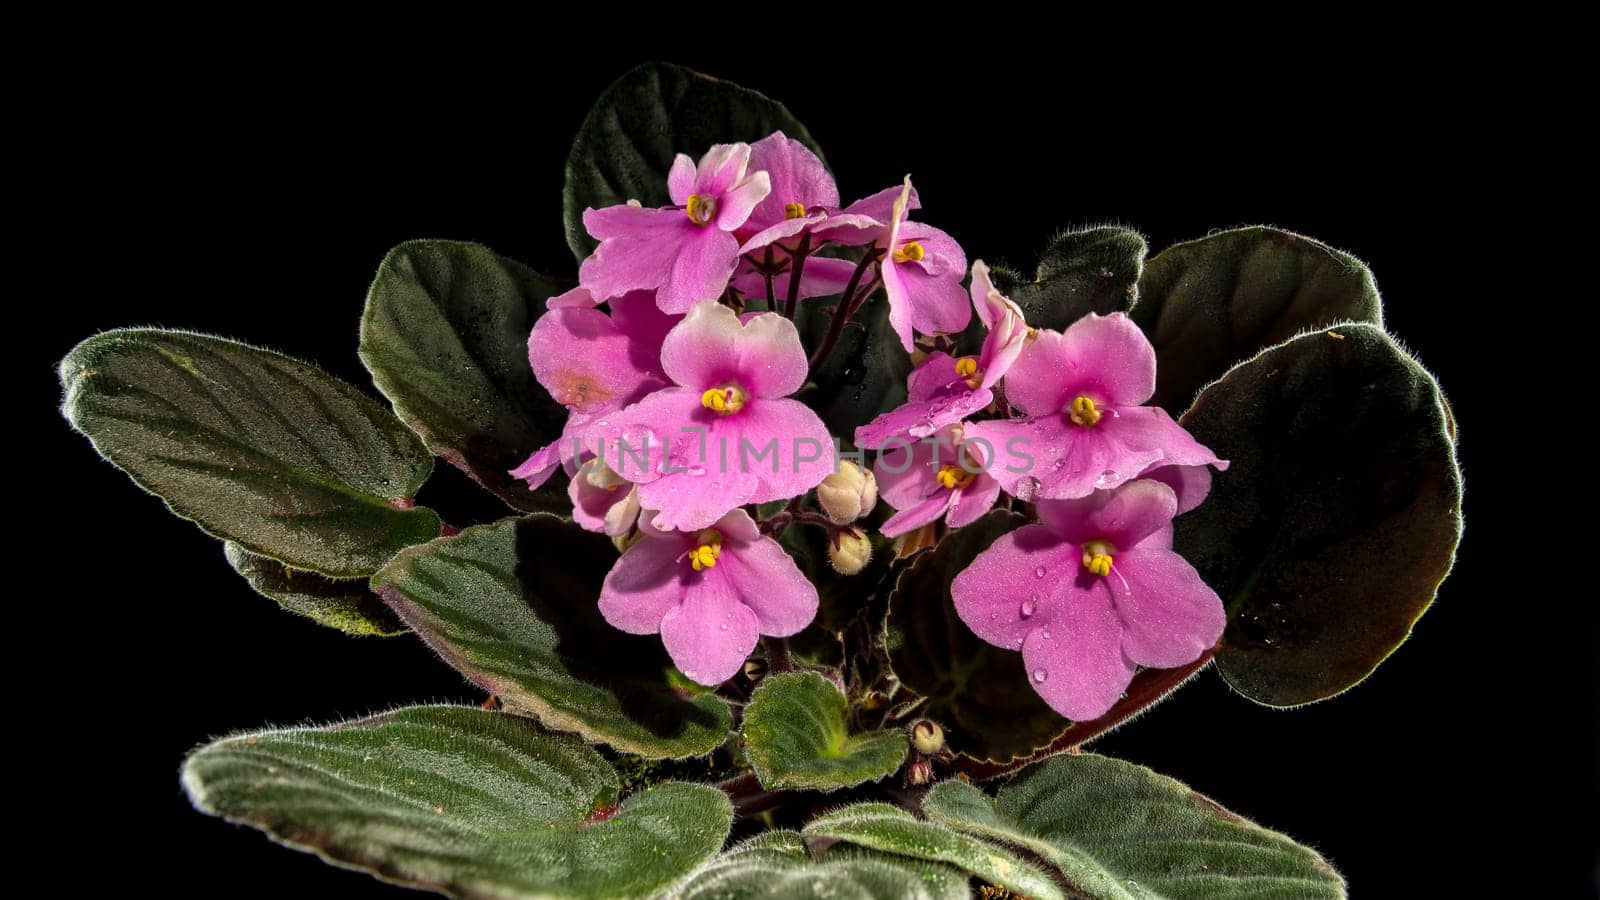 Blossoming pink viola flowers on a black background close up